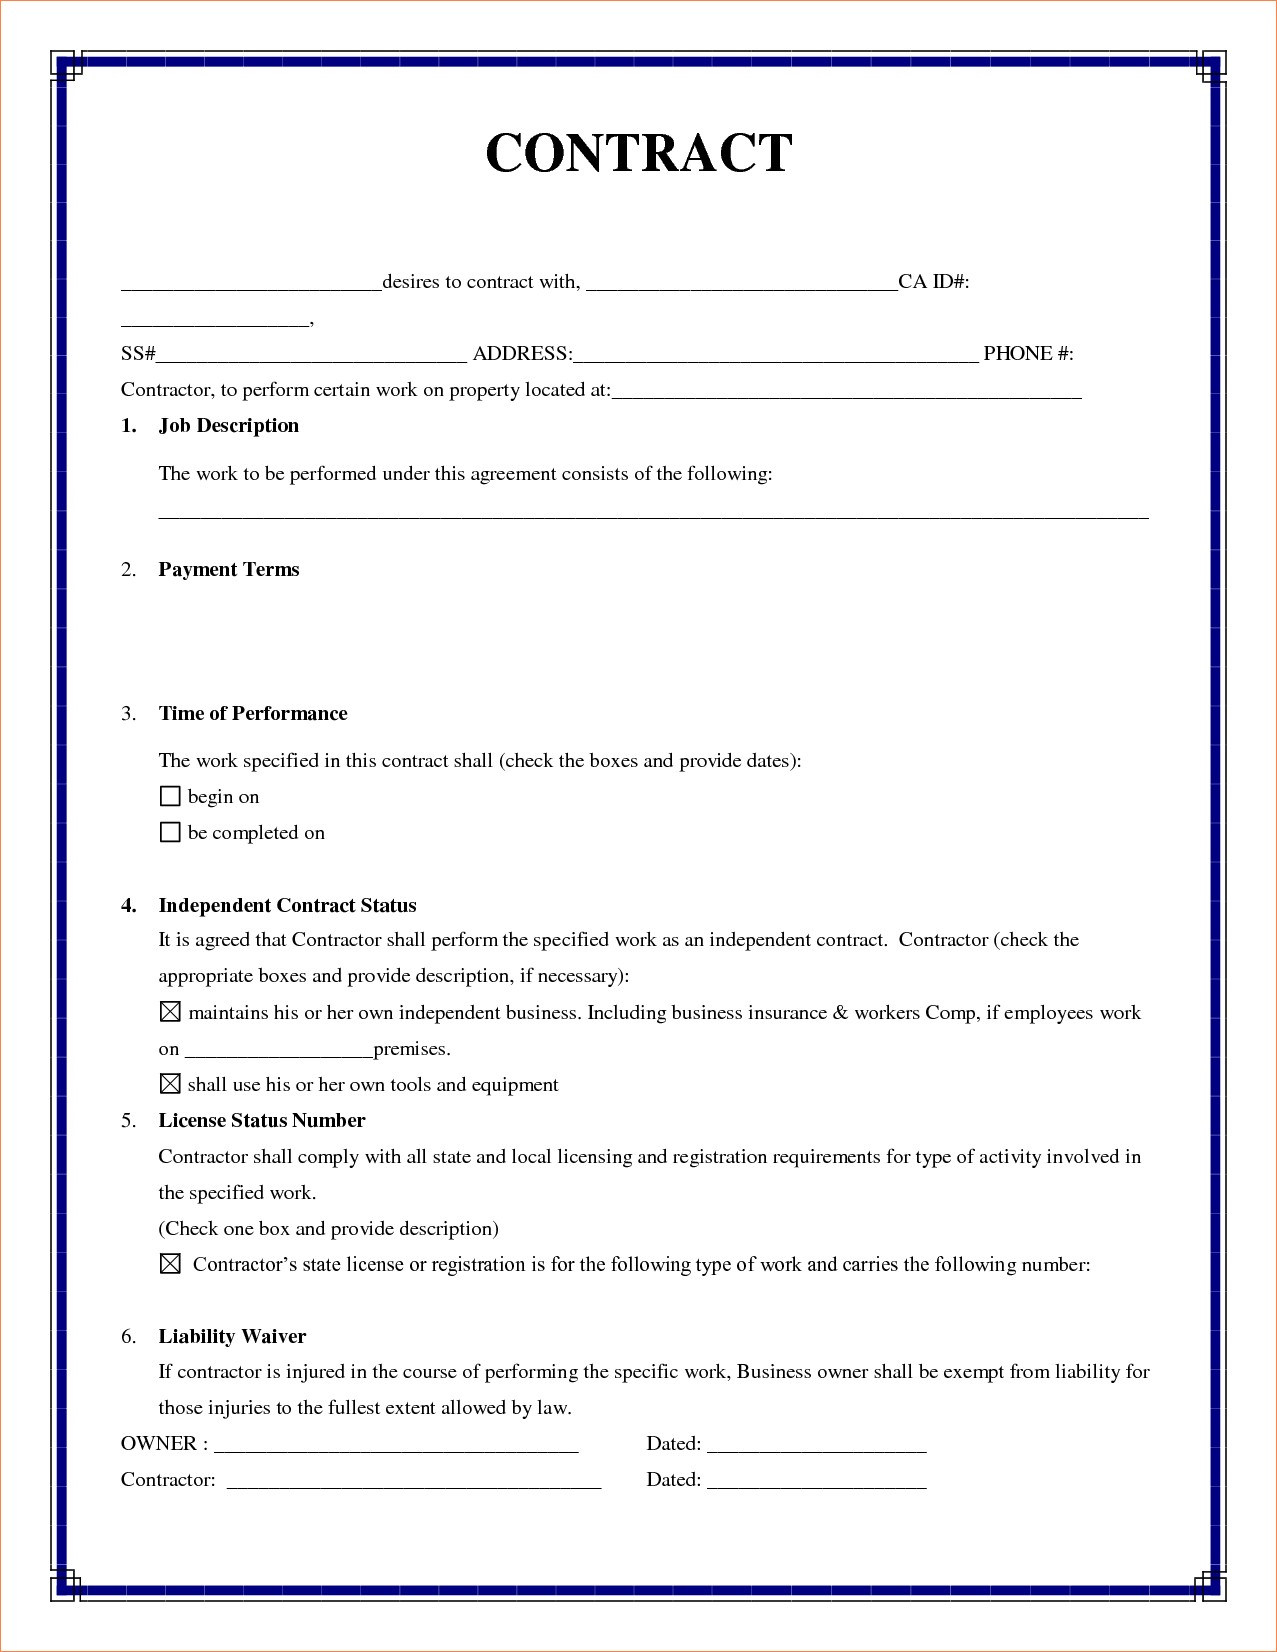 Simple Work Contract Agreement New 5 Simple Contractor 